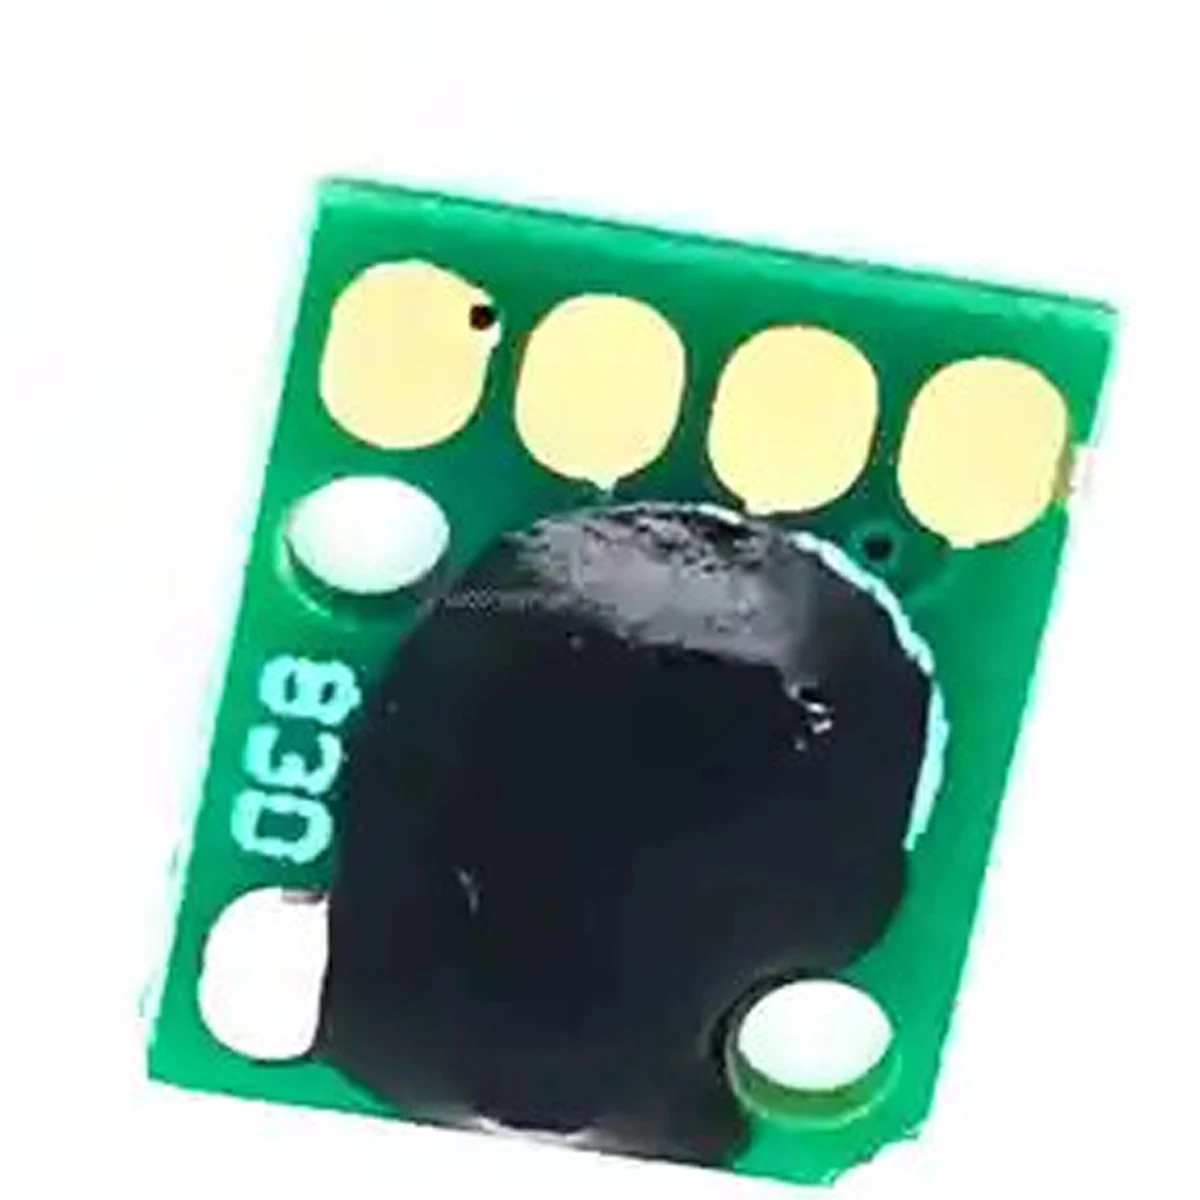 

Image Imaging Unit Drum Chip FOR Canon IR IR-ADV IR ADV IRADV DX C5860-iMFP C5870-iMFP C5880-iMFP C5840-i-MFP C5850-i-MFP